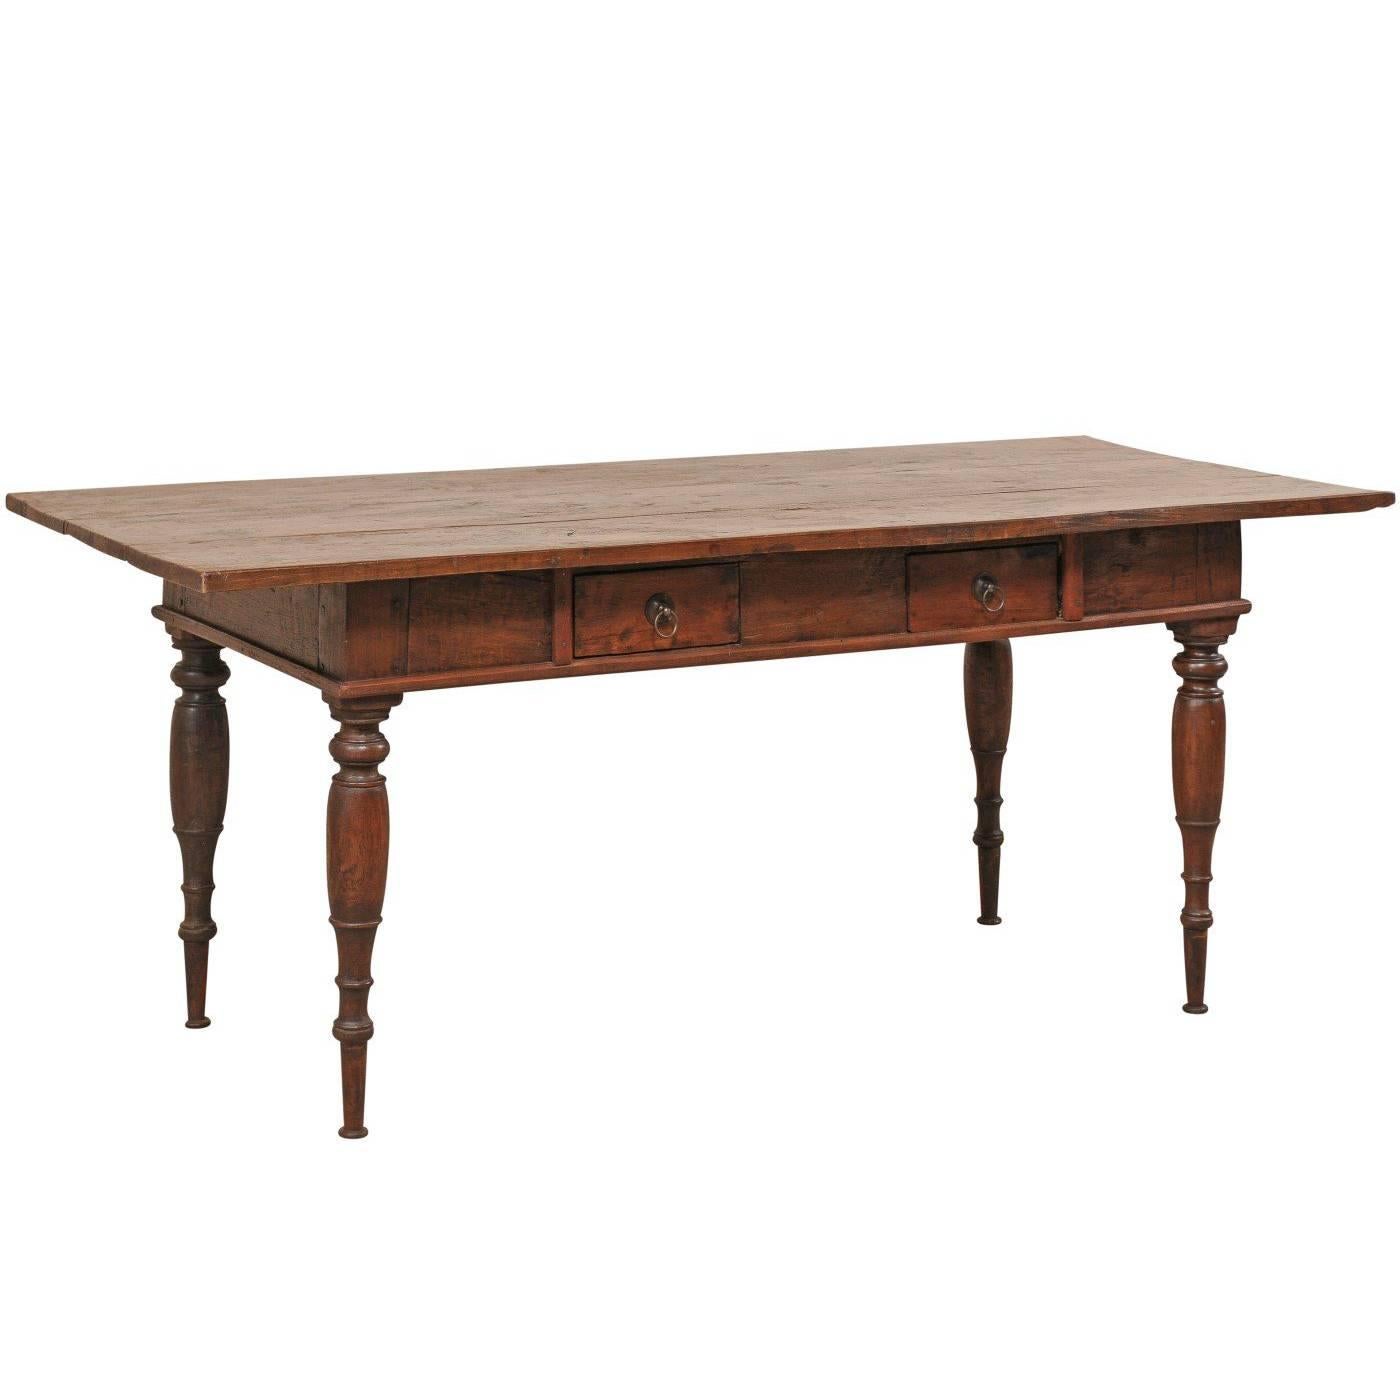 Brazilian Table from the Early 20th Century of Rich Brown Wood with Two Drawers